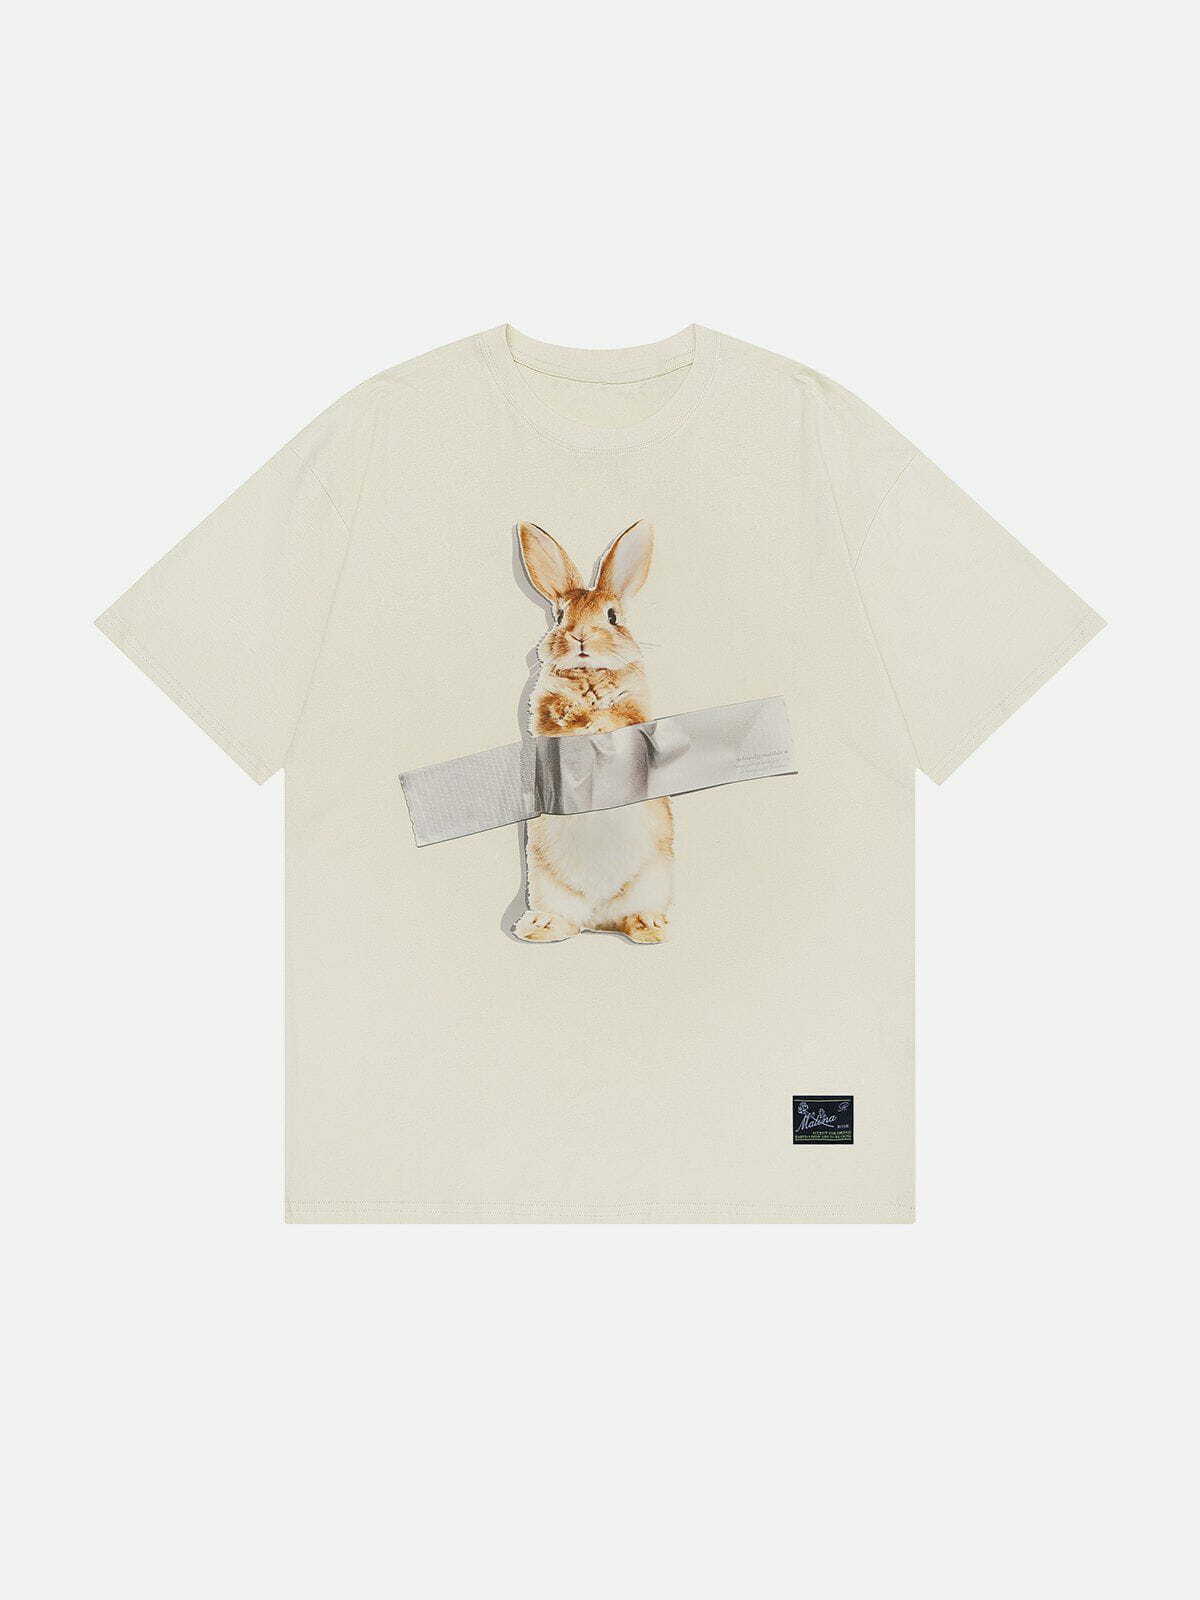 quirky rabbit print tee playful & unique streetwear 3810